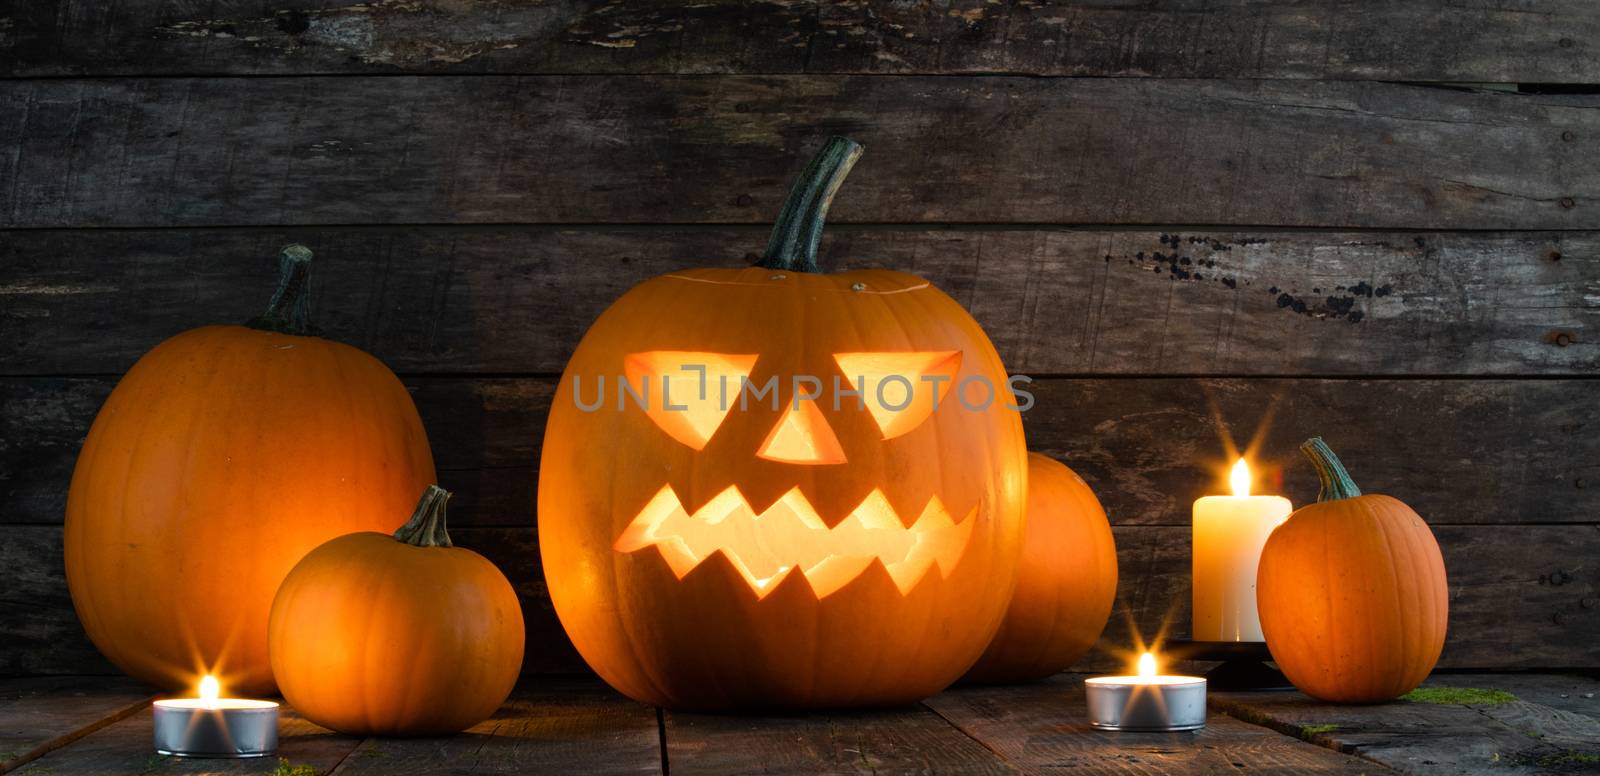 Halloween pumpkin head jack o lantern and candles on wooden background